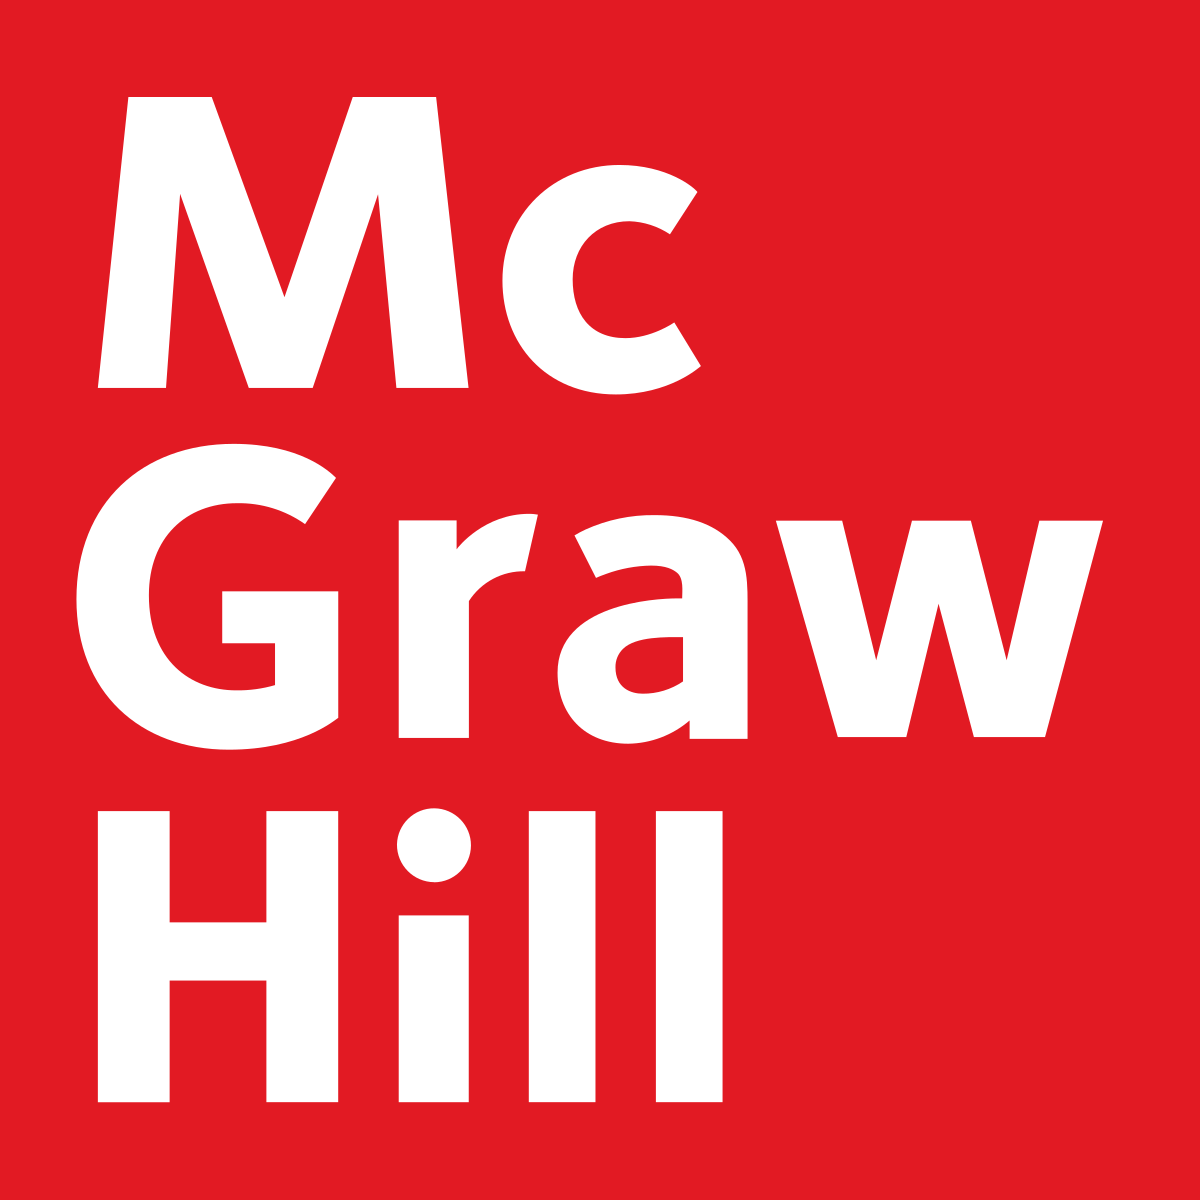 McGraw Hill logo.png